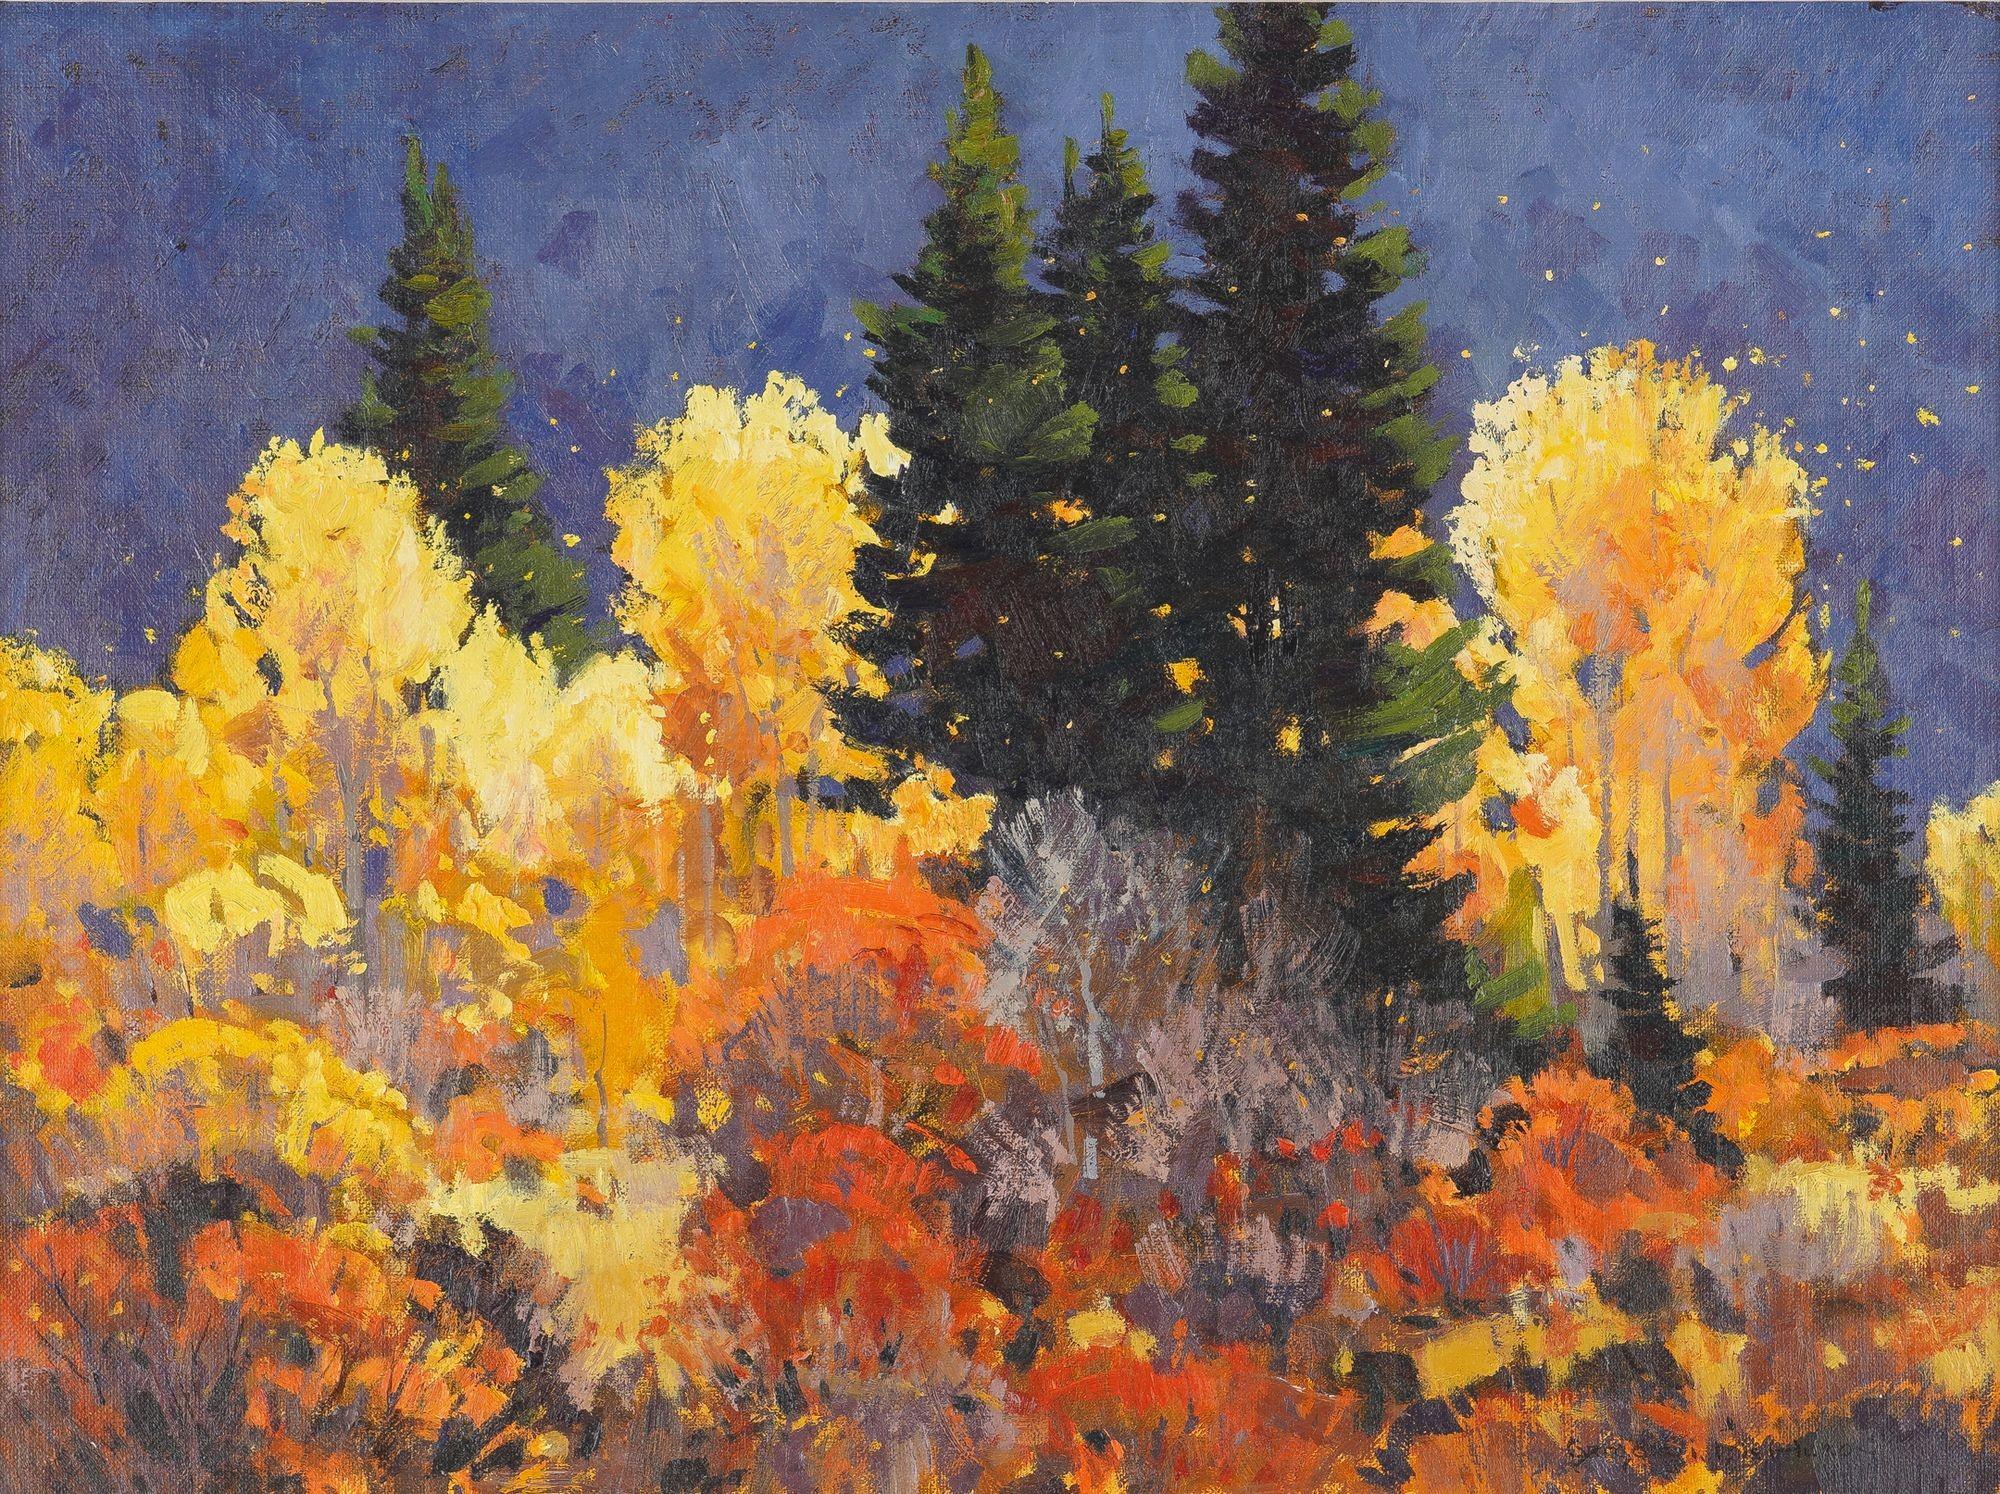 Tightly cropped landscape view of pines and aspen trees awash in autumnal yellows and reds, paired against a deep blue twilight sky. Born in 1945, McHuron graduated with a degree in art from Oregon State University and studied extensively with